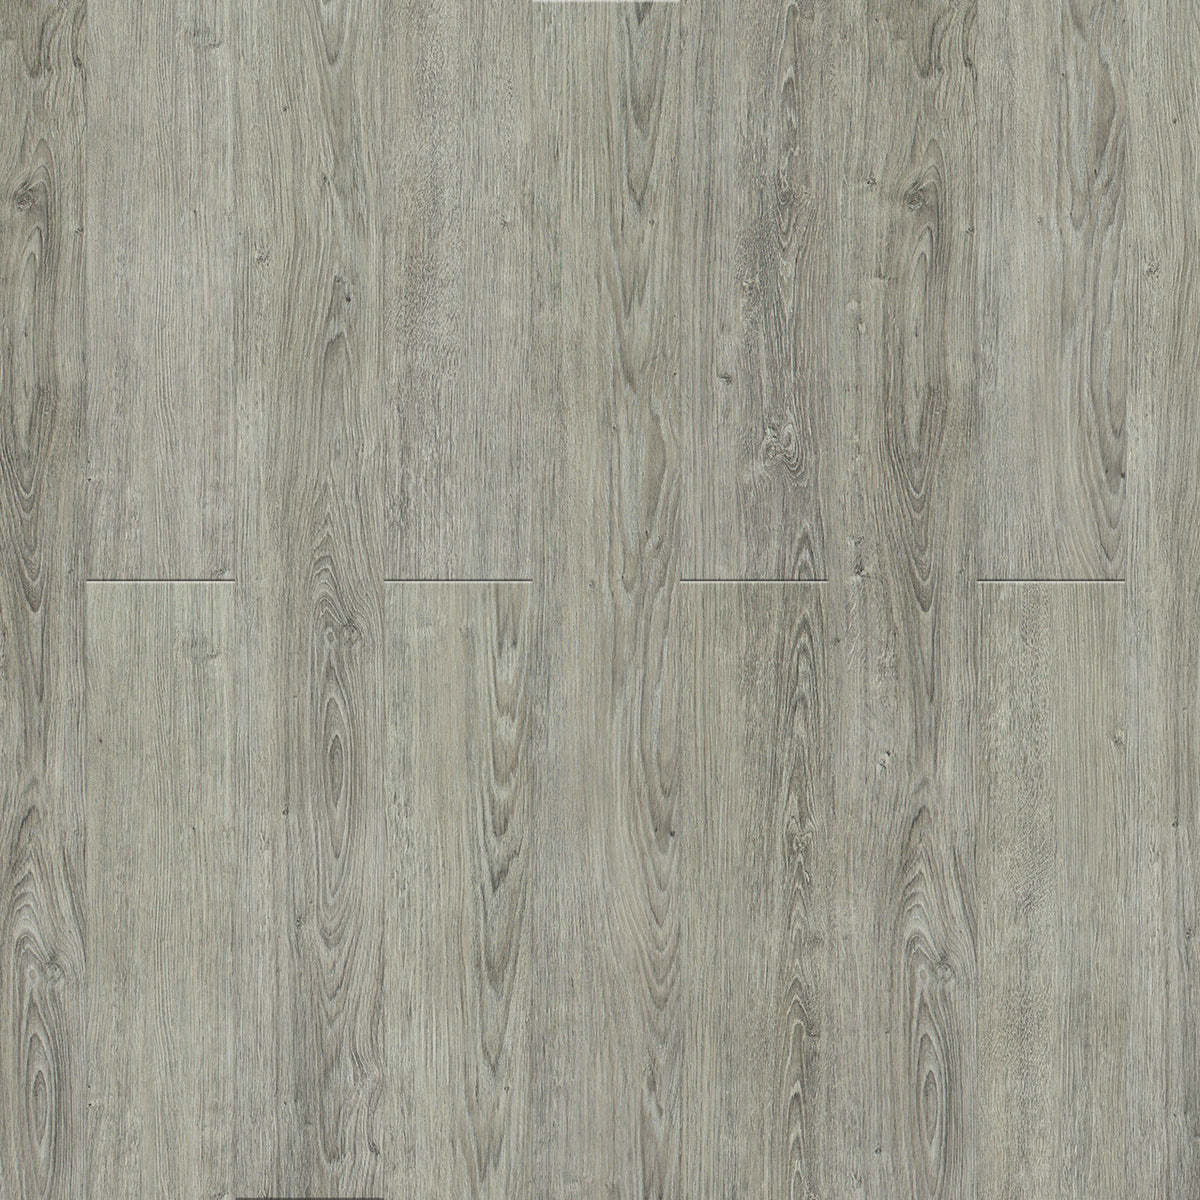 Engineered Floors - Triumph Collection - The New Standard II - 6 in. x 48 in. - Castaway